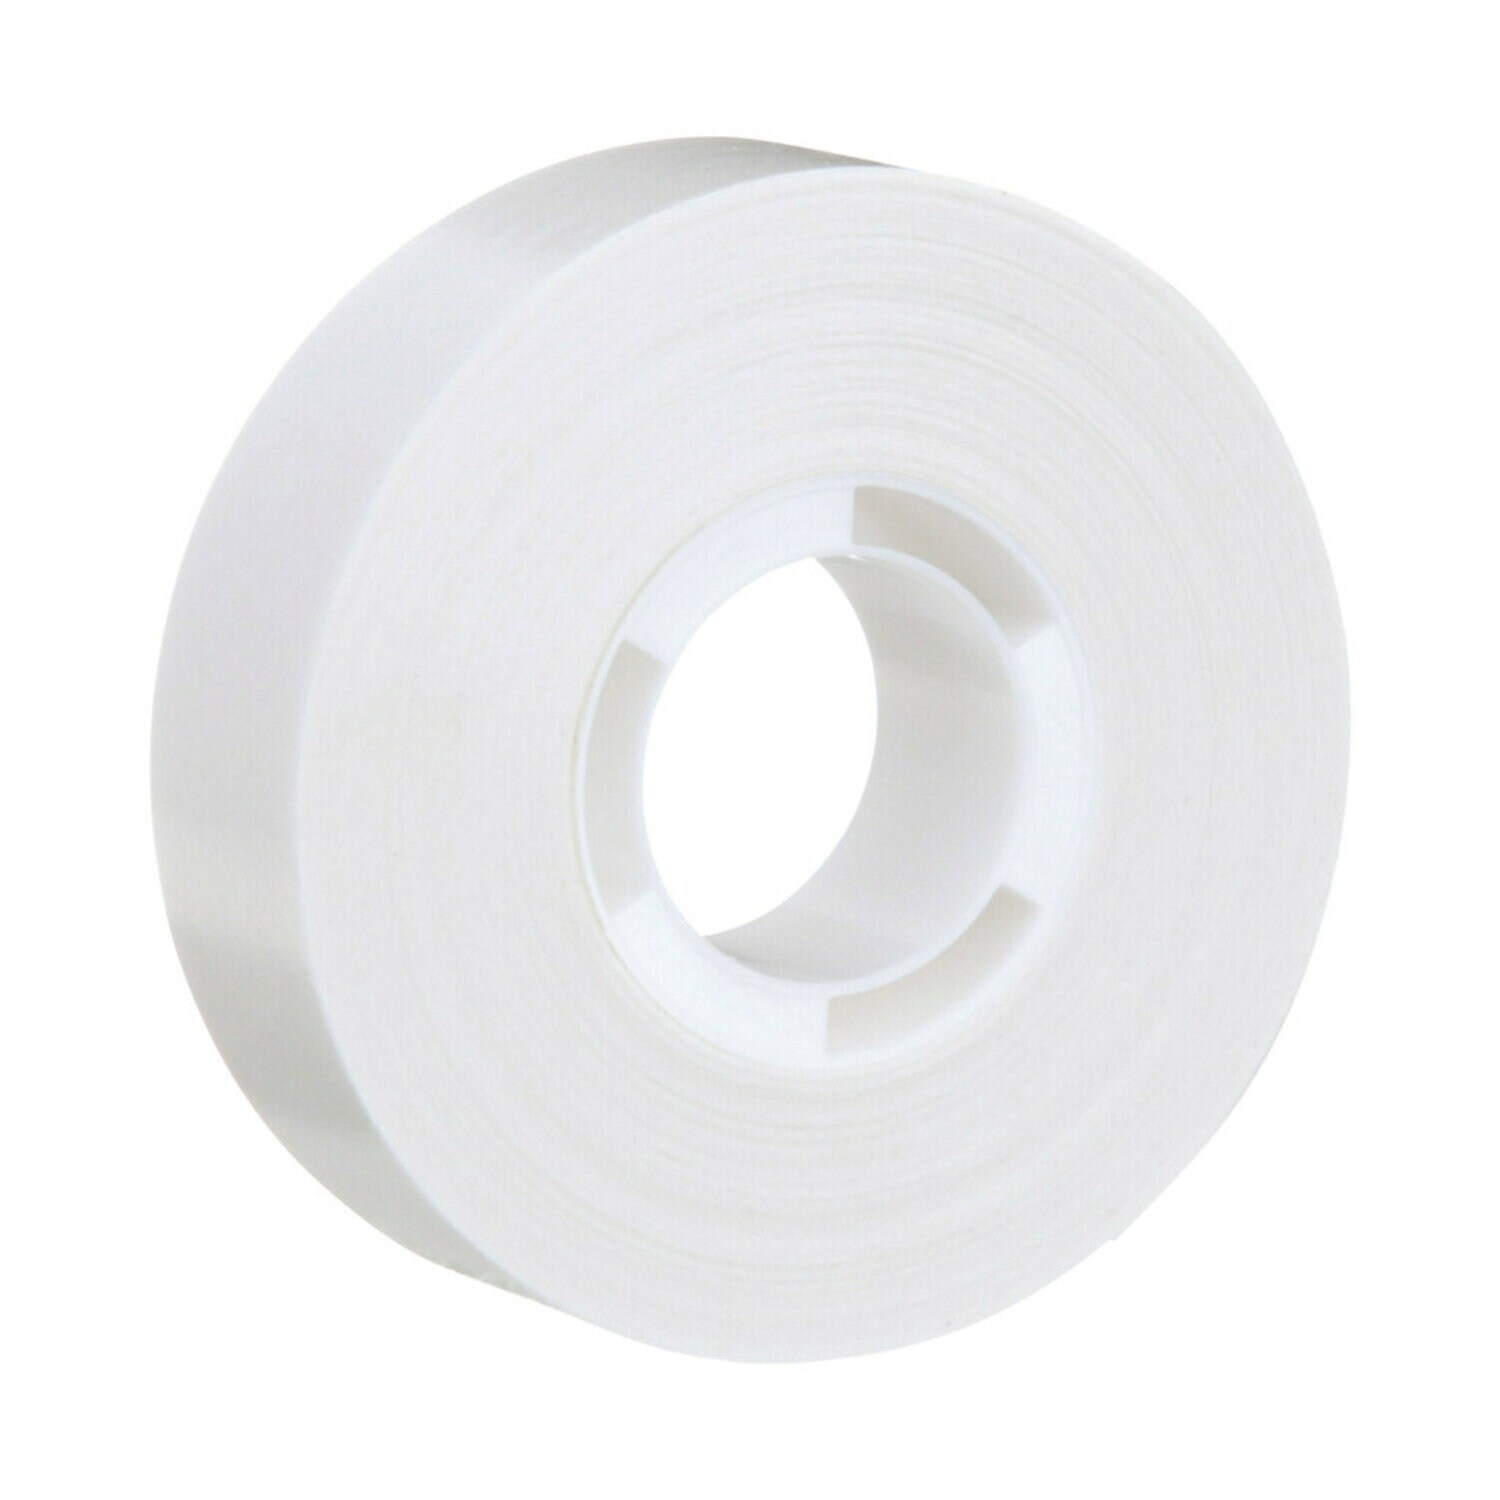 7000048496 - Scotch ATG Repositionable Double Coated Tissue Tape 928, Translucent
White, 3/4 in x 18 yd, 2 mil, 12 rolls/inner, 4 inners/case